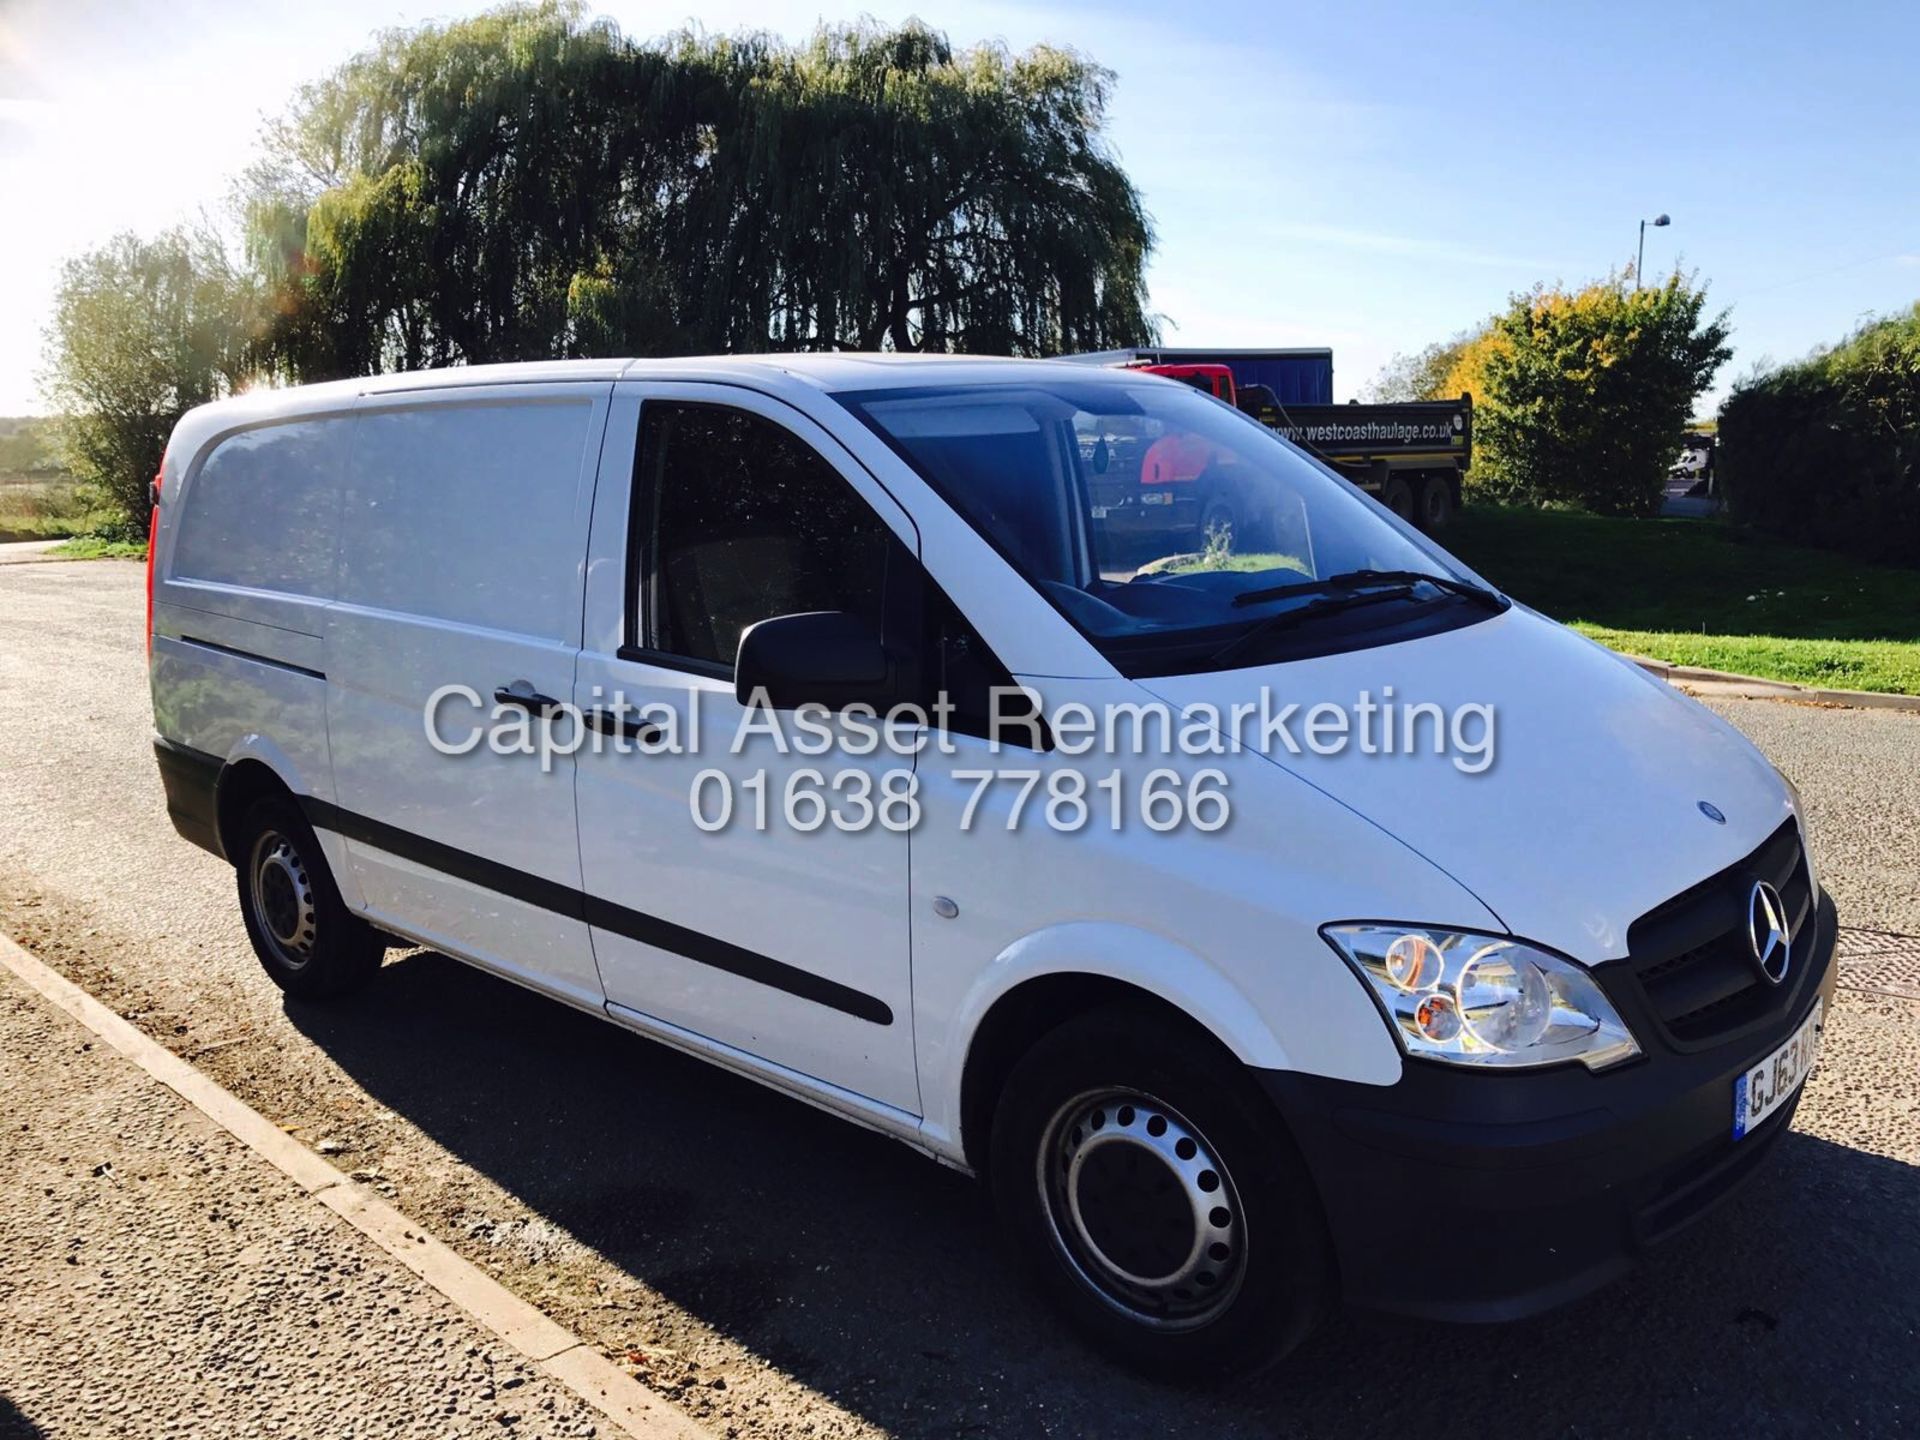 MERCEDES VITO 113CDI LWB "130BHP - 6 SPEED" 2014 MODEL - NEW SHAPE - AIR CON - LOW MILEAGE - Image 3 of 13